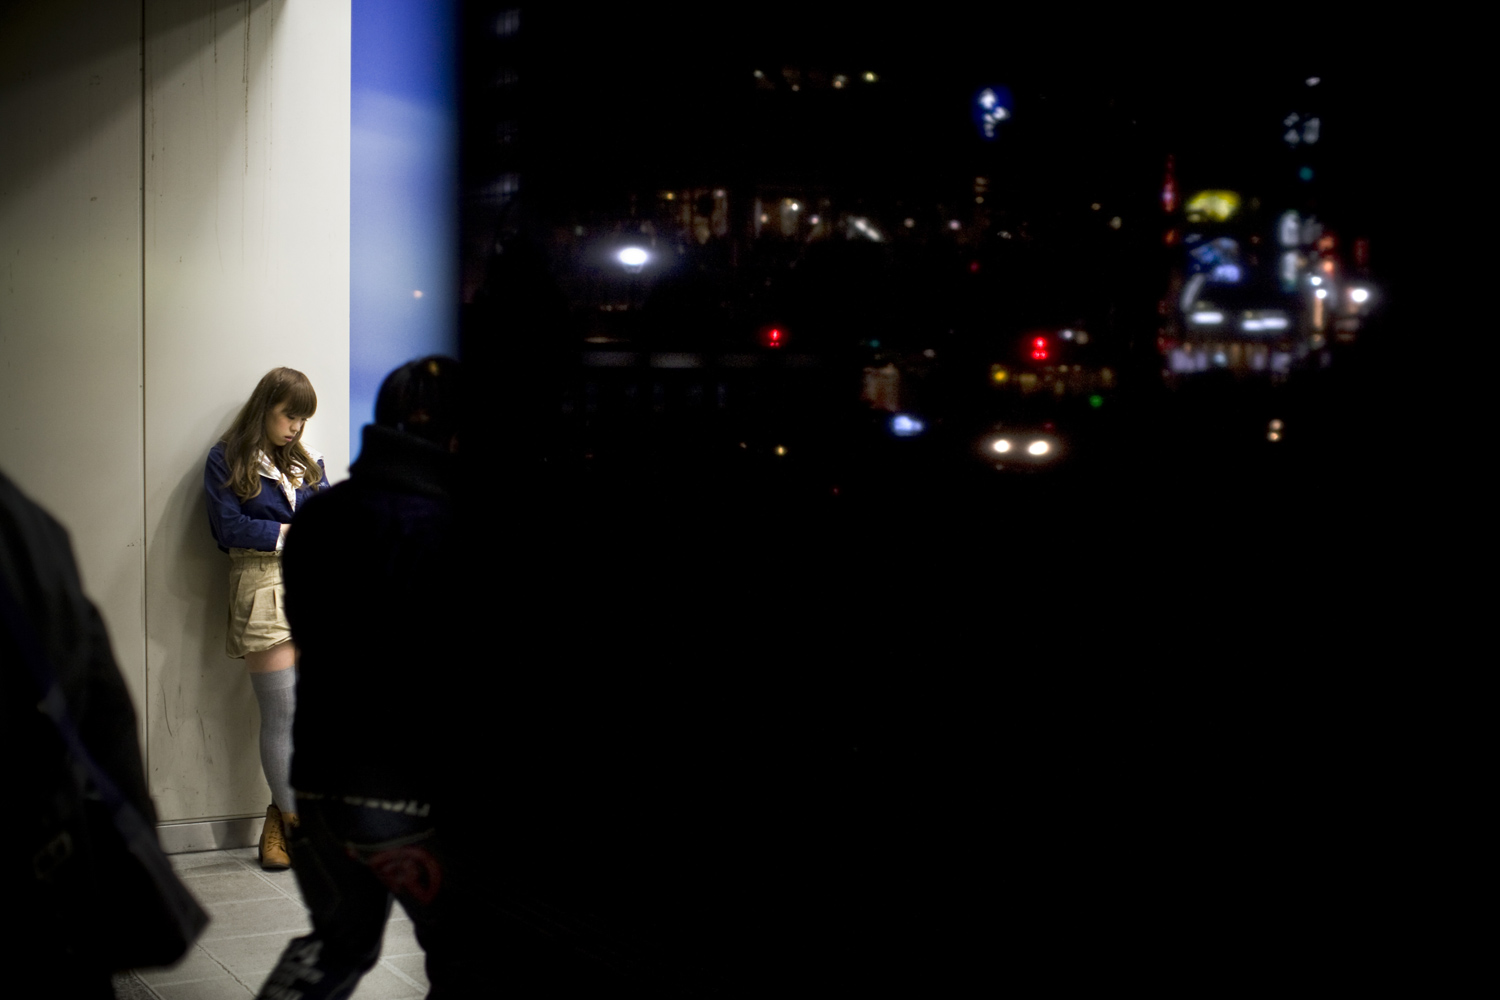 A woman waits at the entrance to the Shibuya subway station in Tokyo while the usually vibrant streets are mostly dark due to the power cuts since the earthquake. March 21, 2011